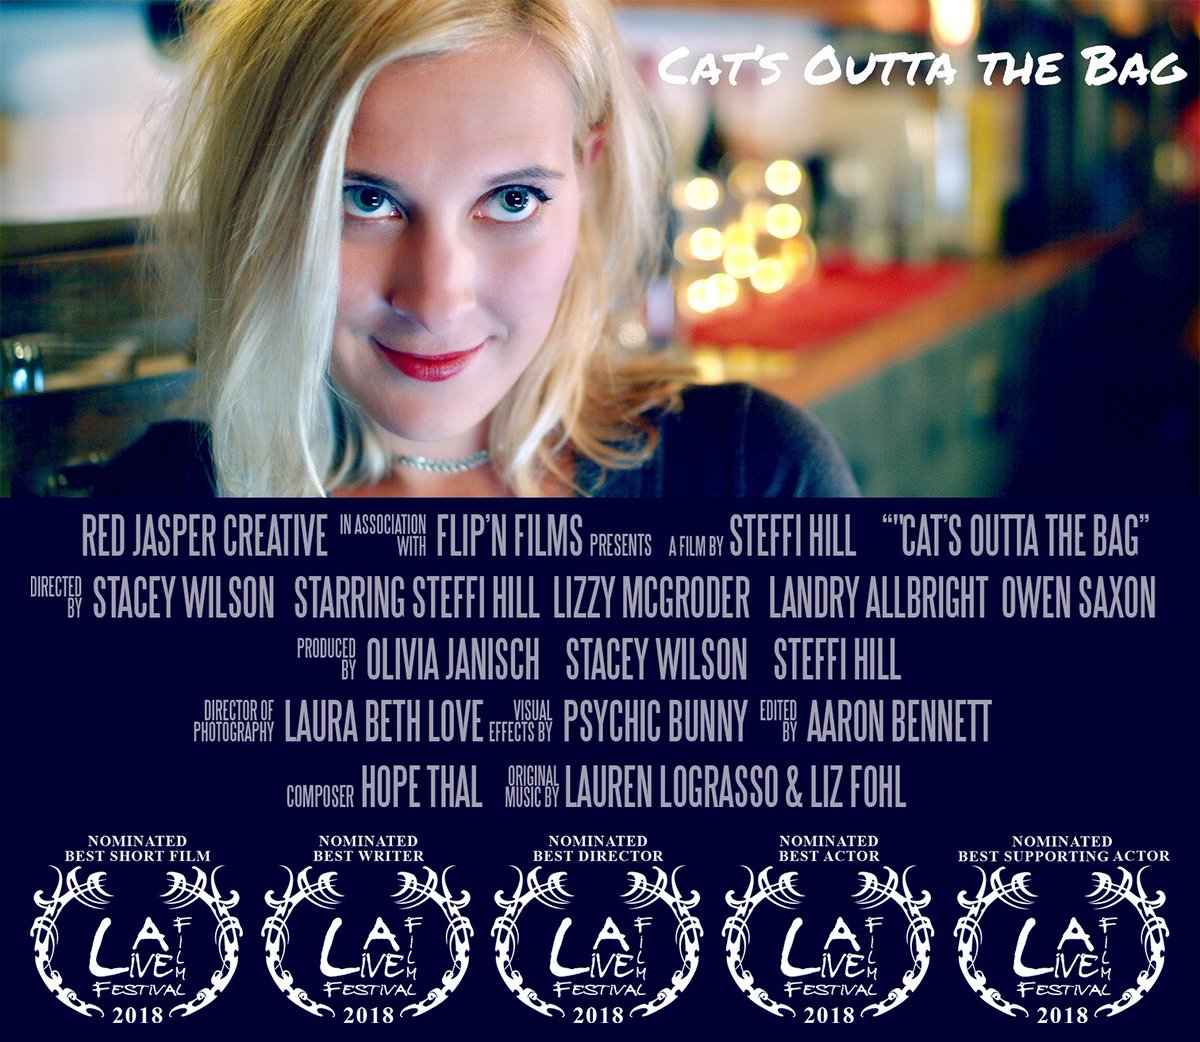 CATS OUTTA THE BAG was officially selected to be screened at #filmfestla ! We were also were nominated for some incredible awards 
🌟 BEST SHORT
🌟 BEST DIRECTOR
🌟BEST WRITER
🌟BEST ACTOR 
🌟BEST SUPPORTING ACTOR

This. Is. Surreal. HECK YES #femalefilmmakers